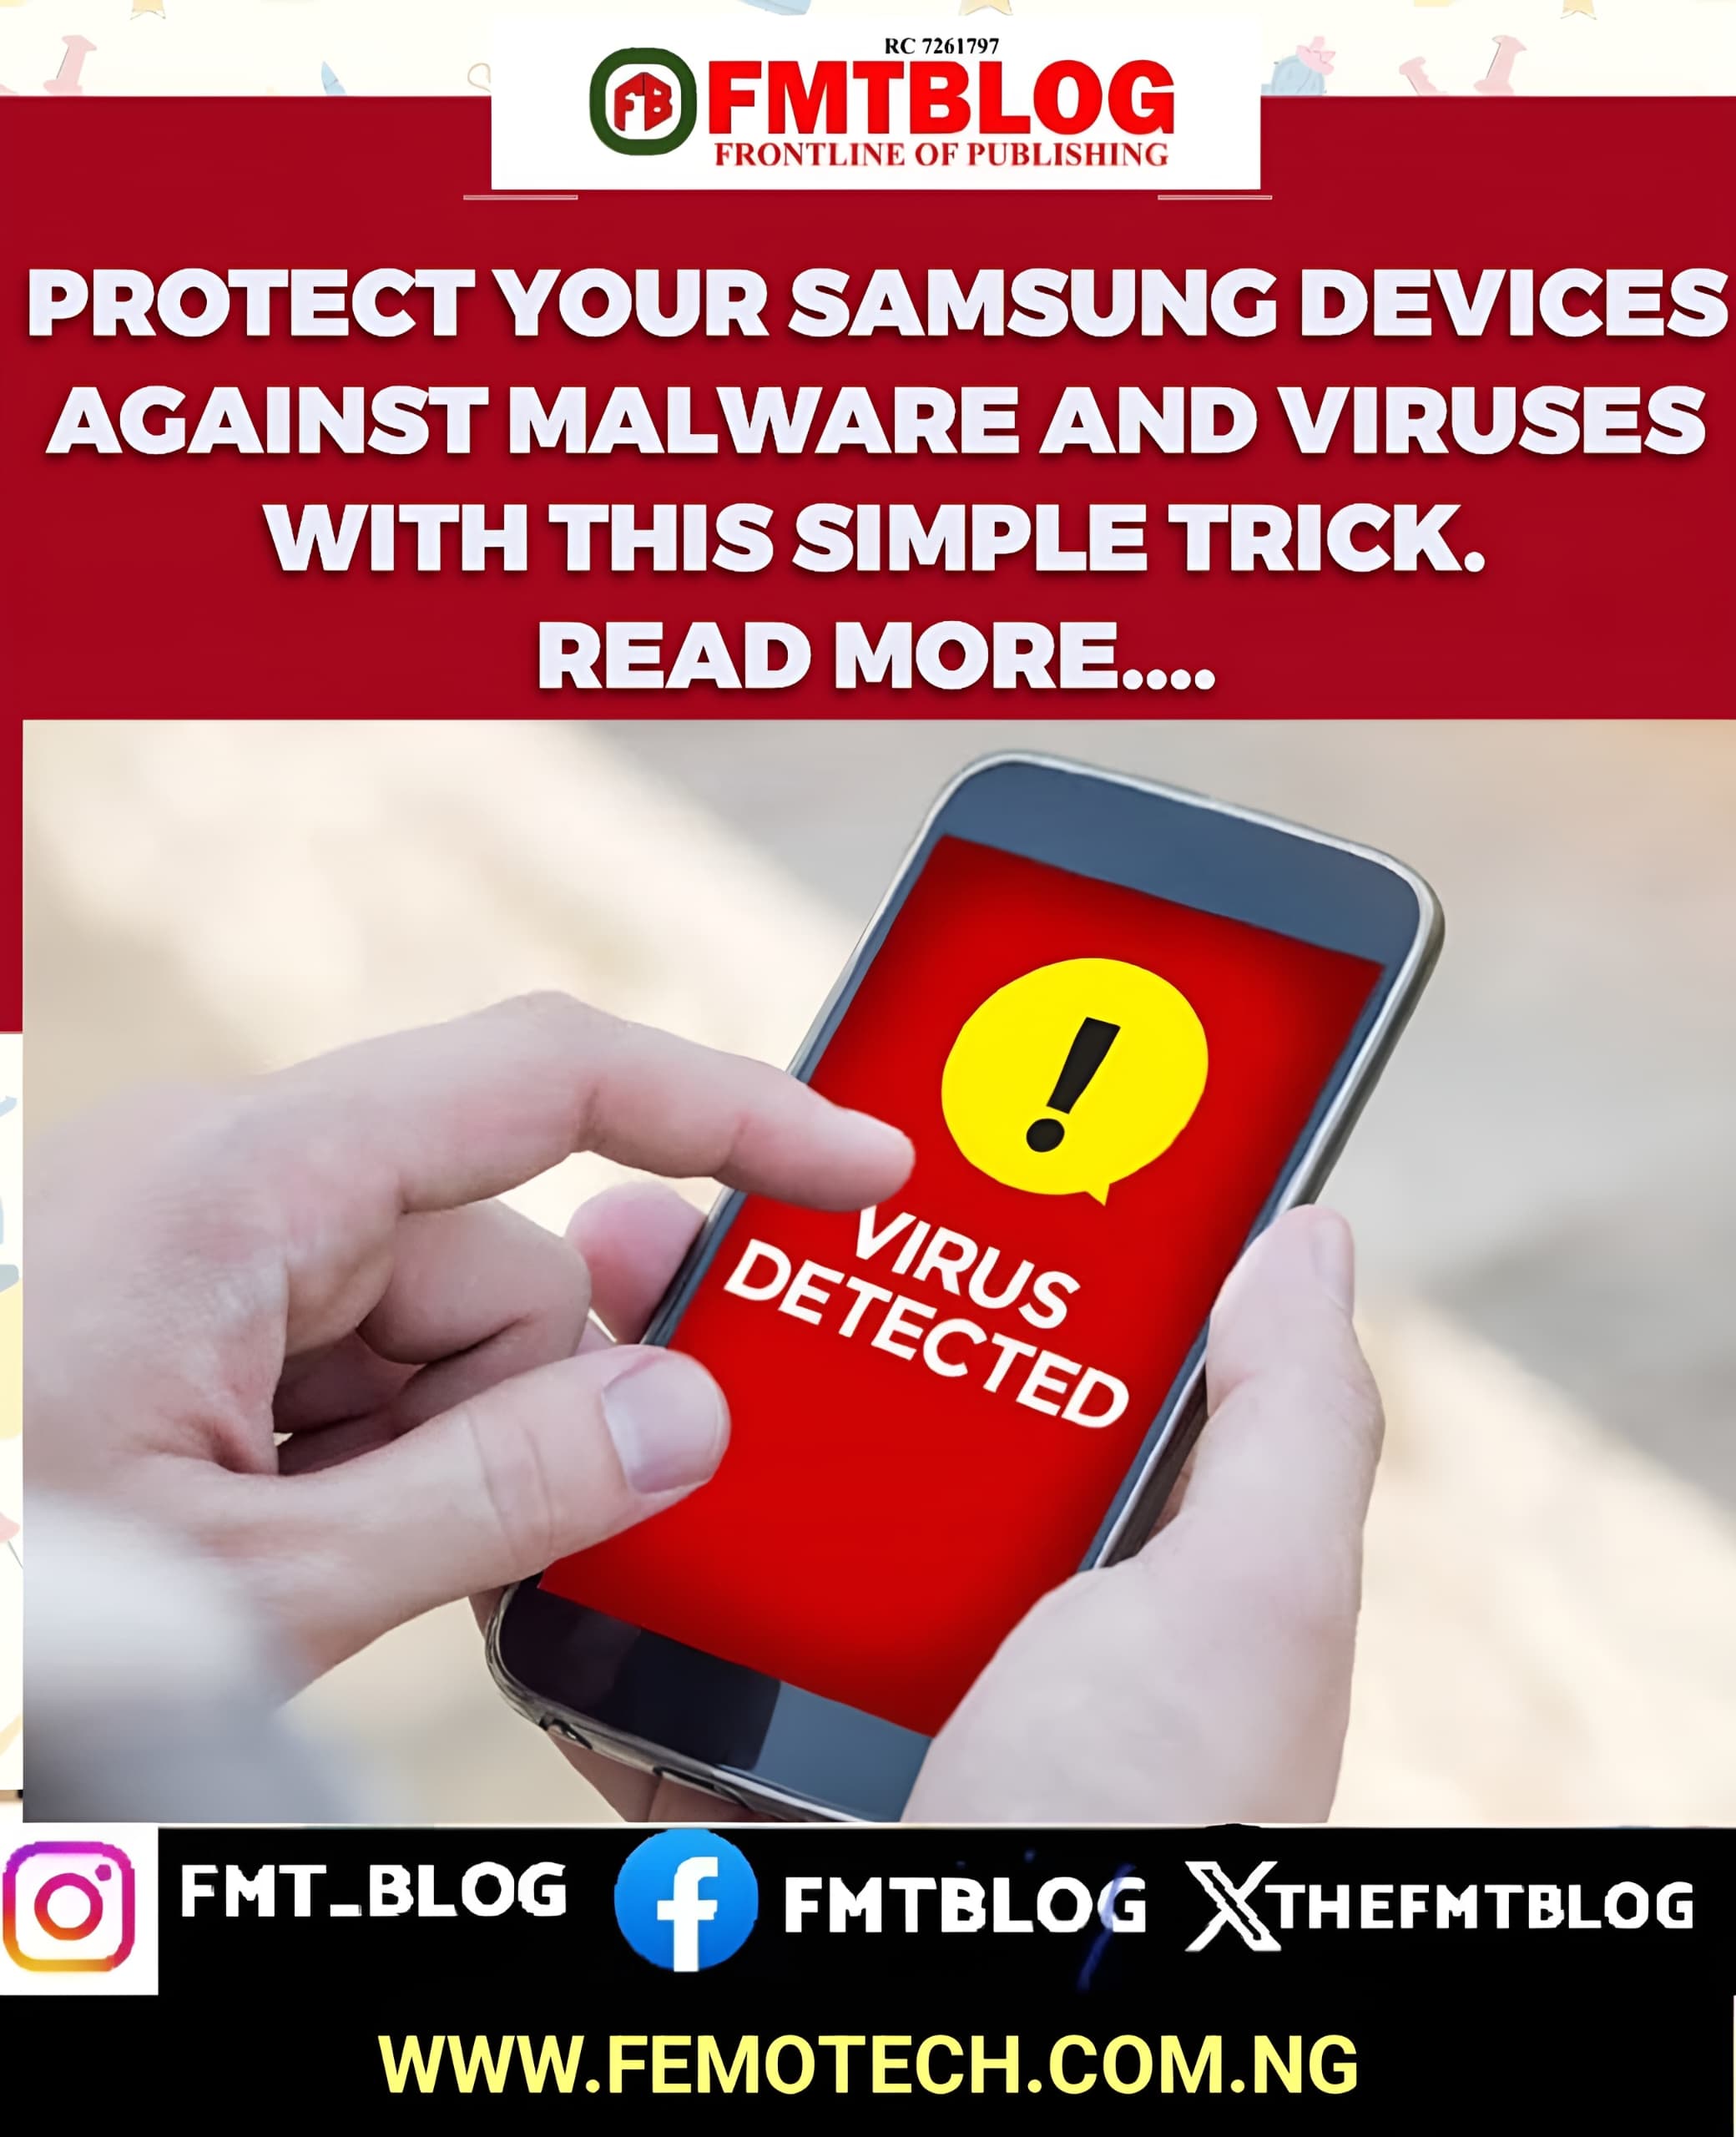 Protect Your Samsung Devices Against Malware And Viruses With This Simple Trick